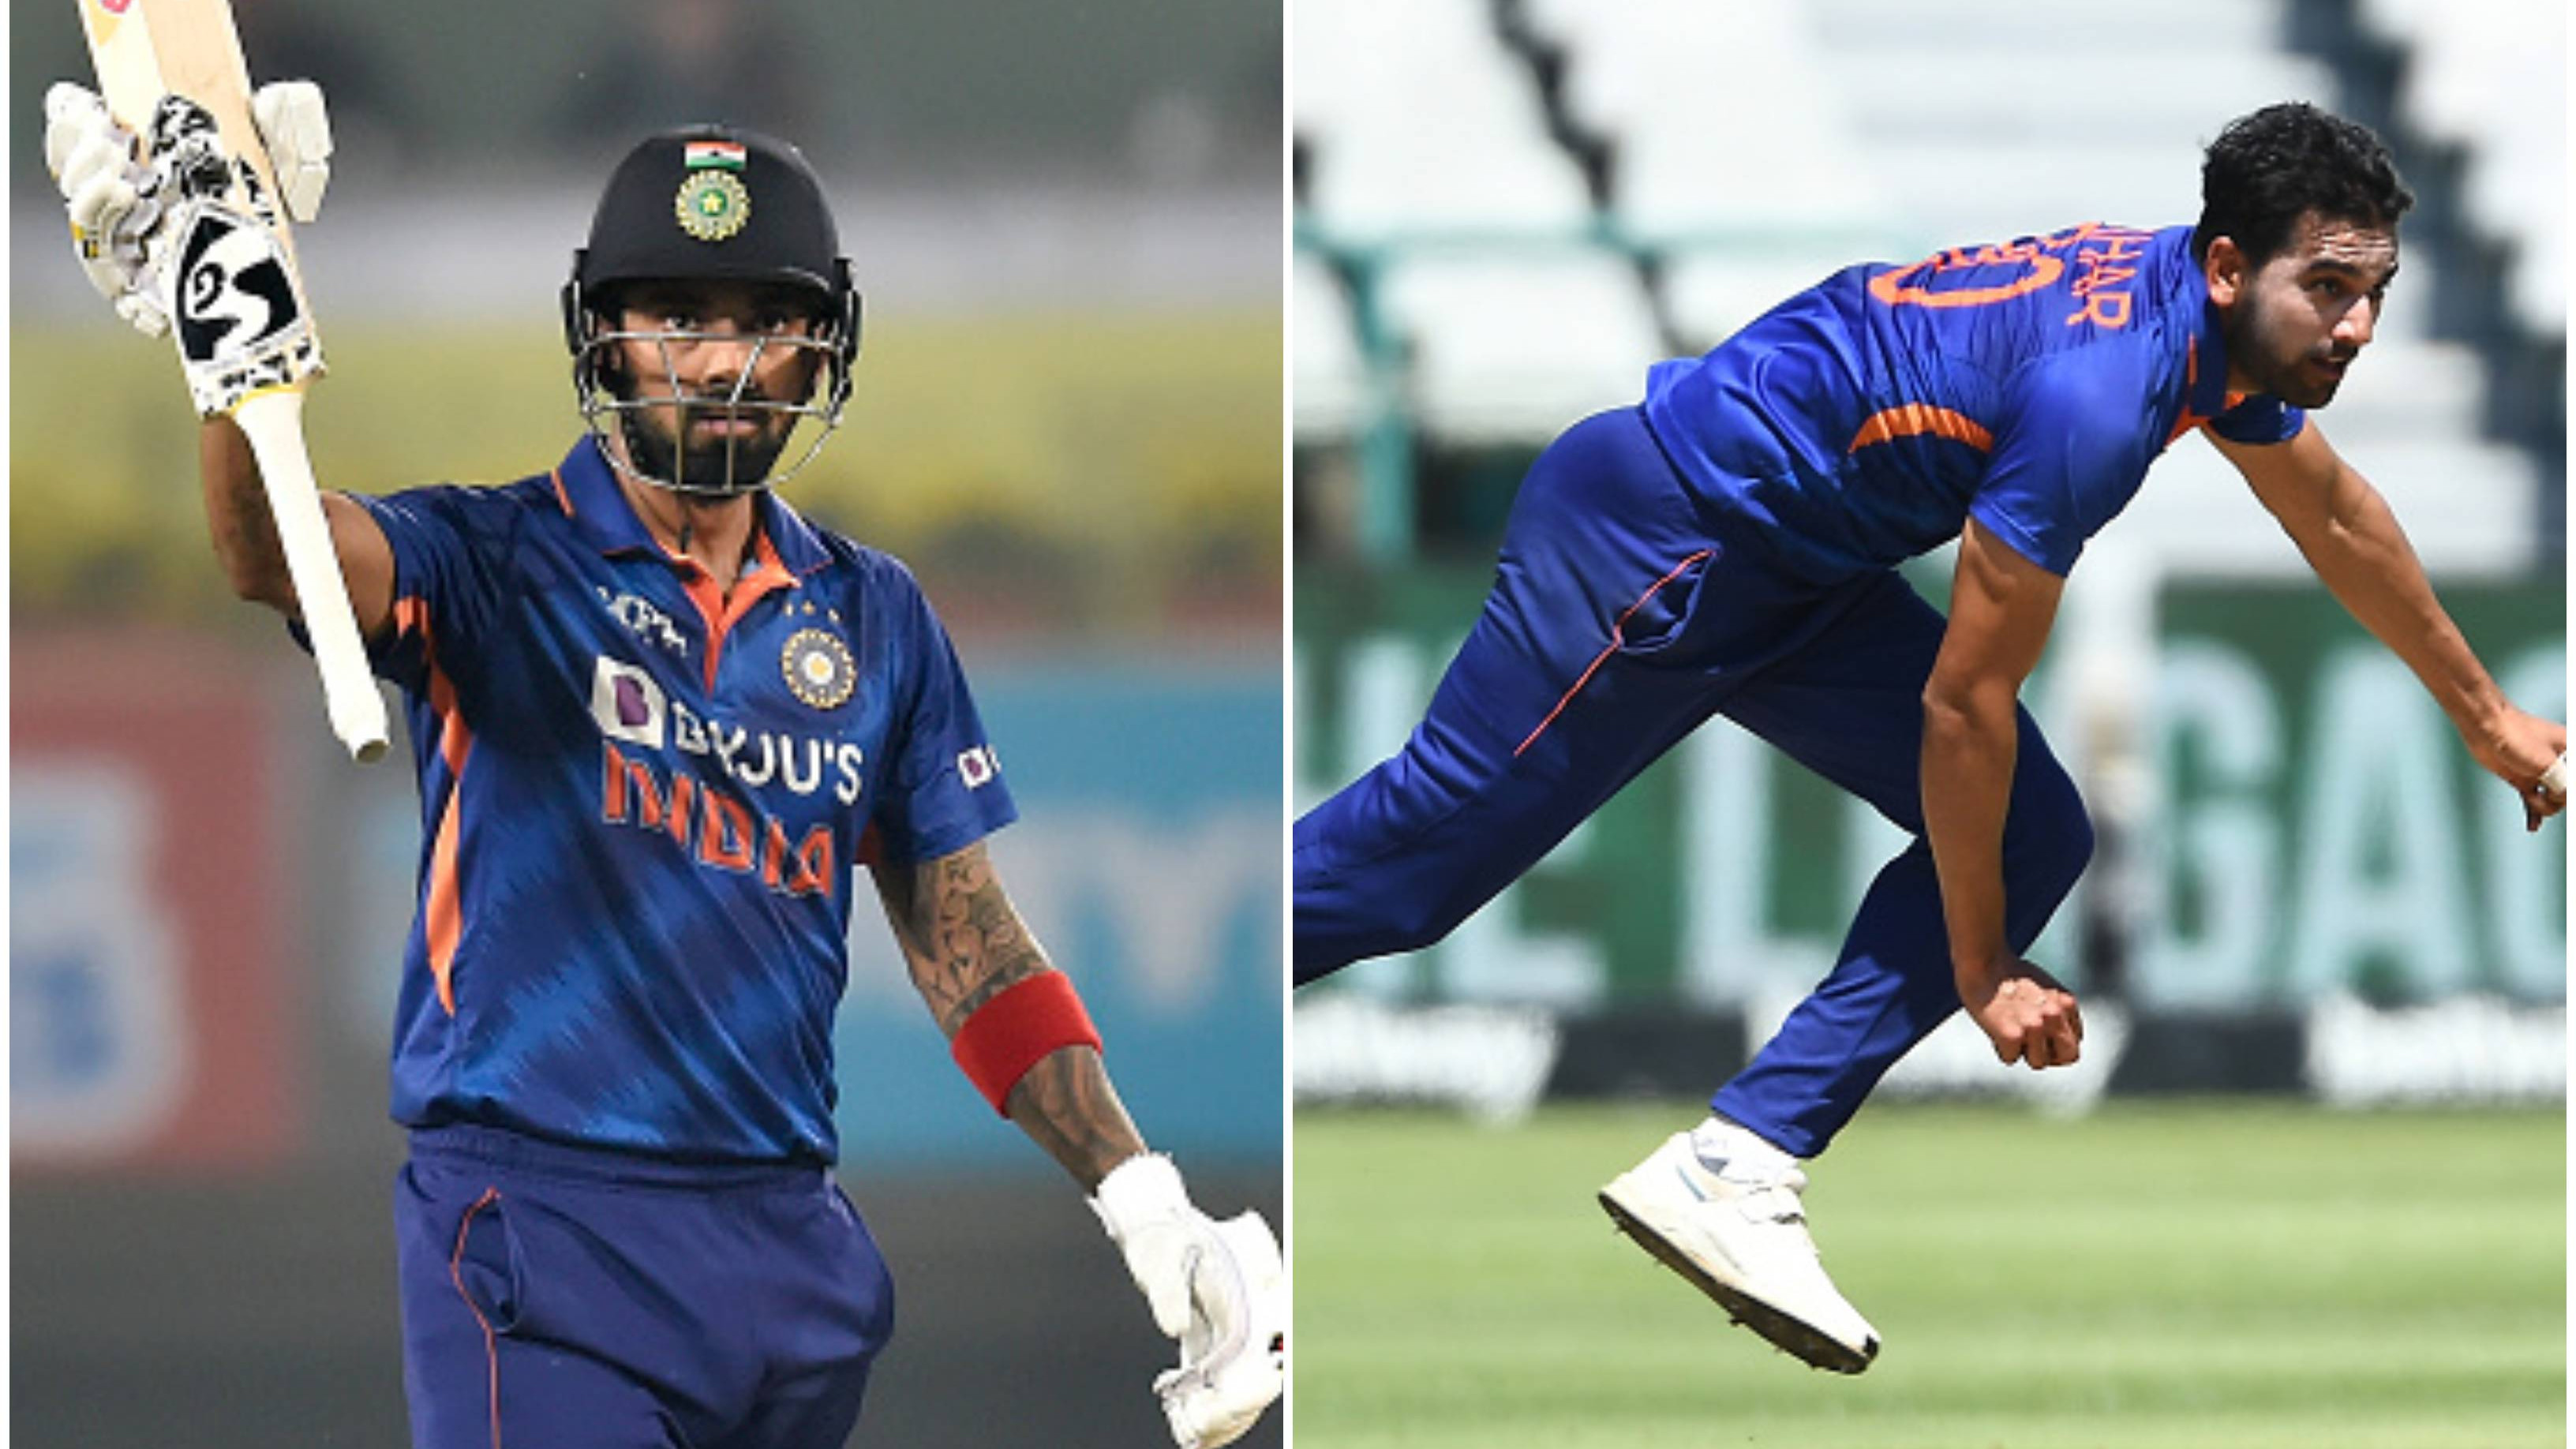 Asia Cup 2022: KL Rahul, Deepak Chahar likely to be included in India’s squad for Asia Cup – Report